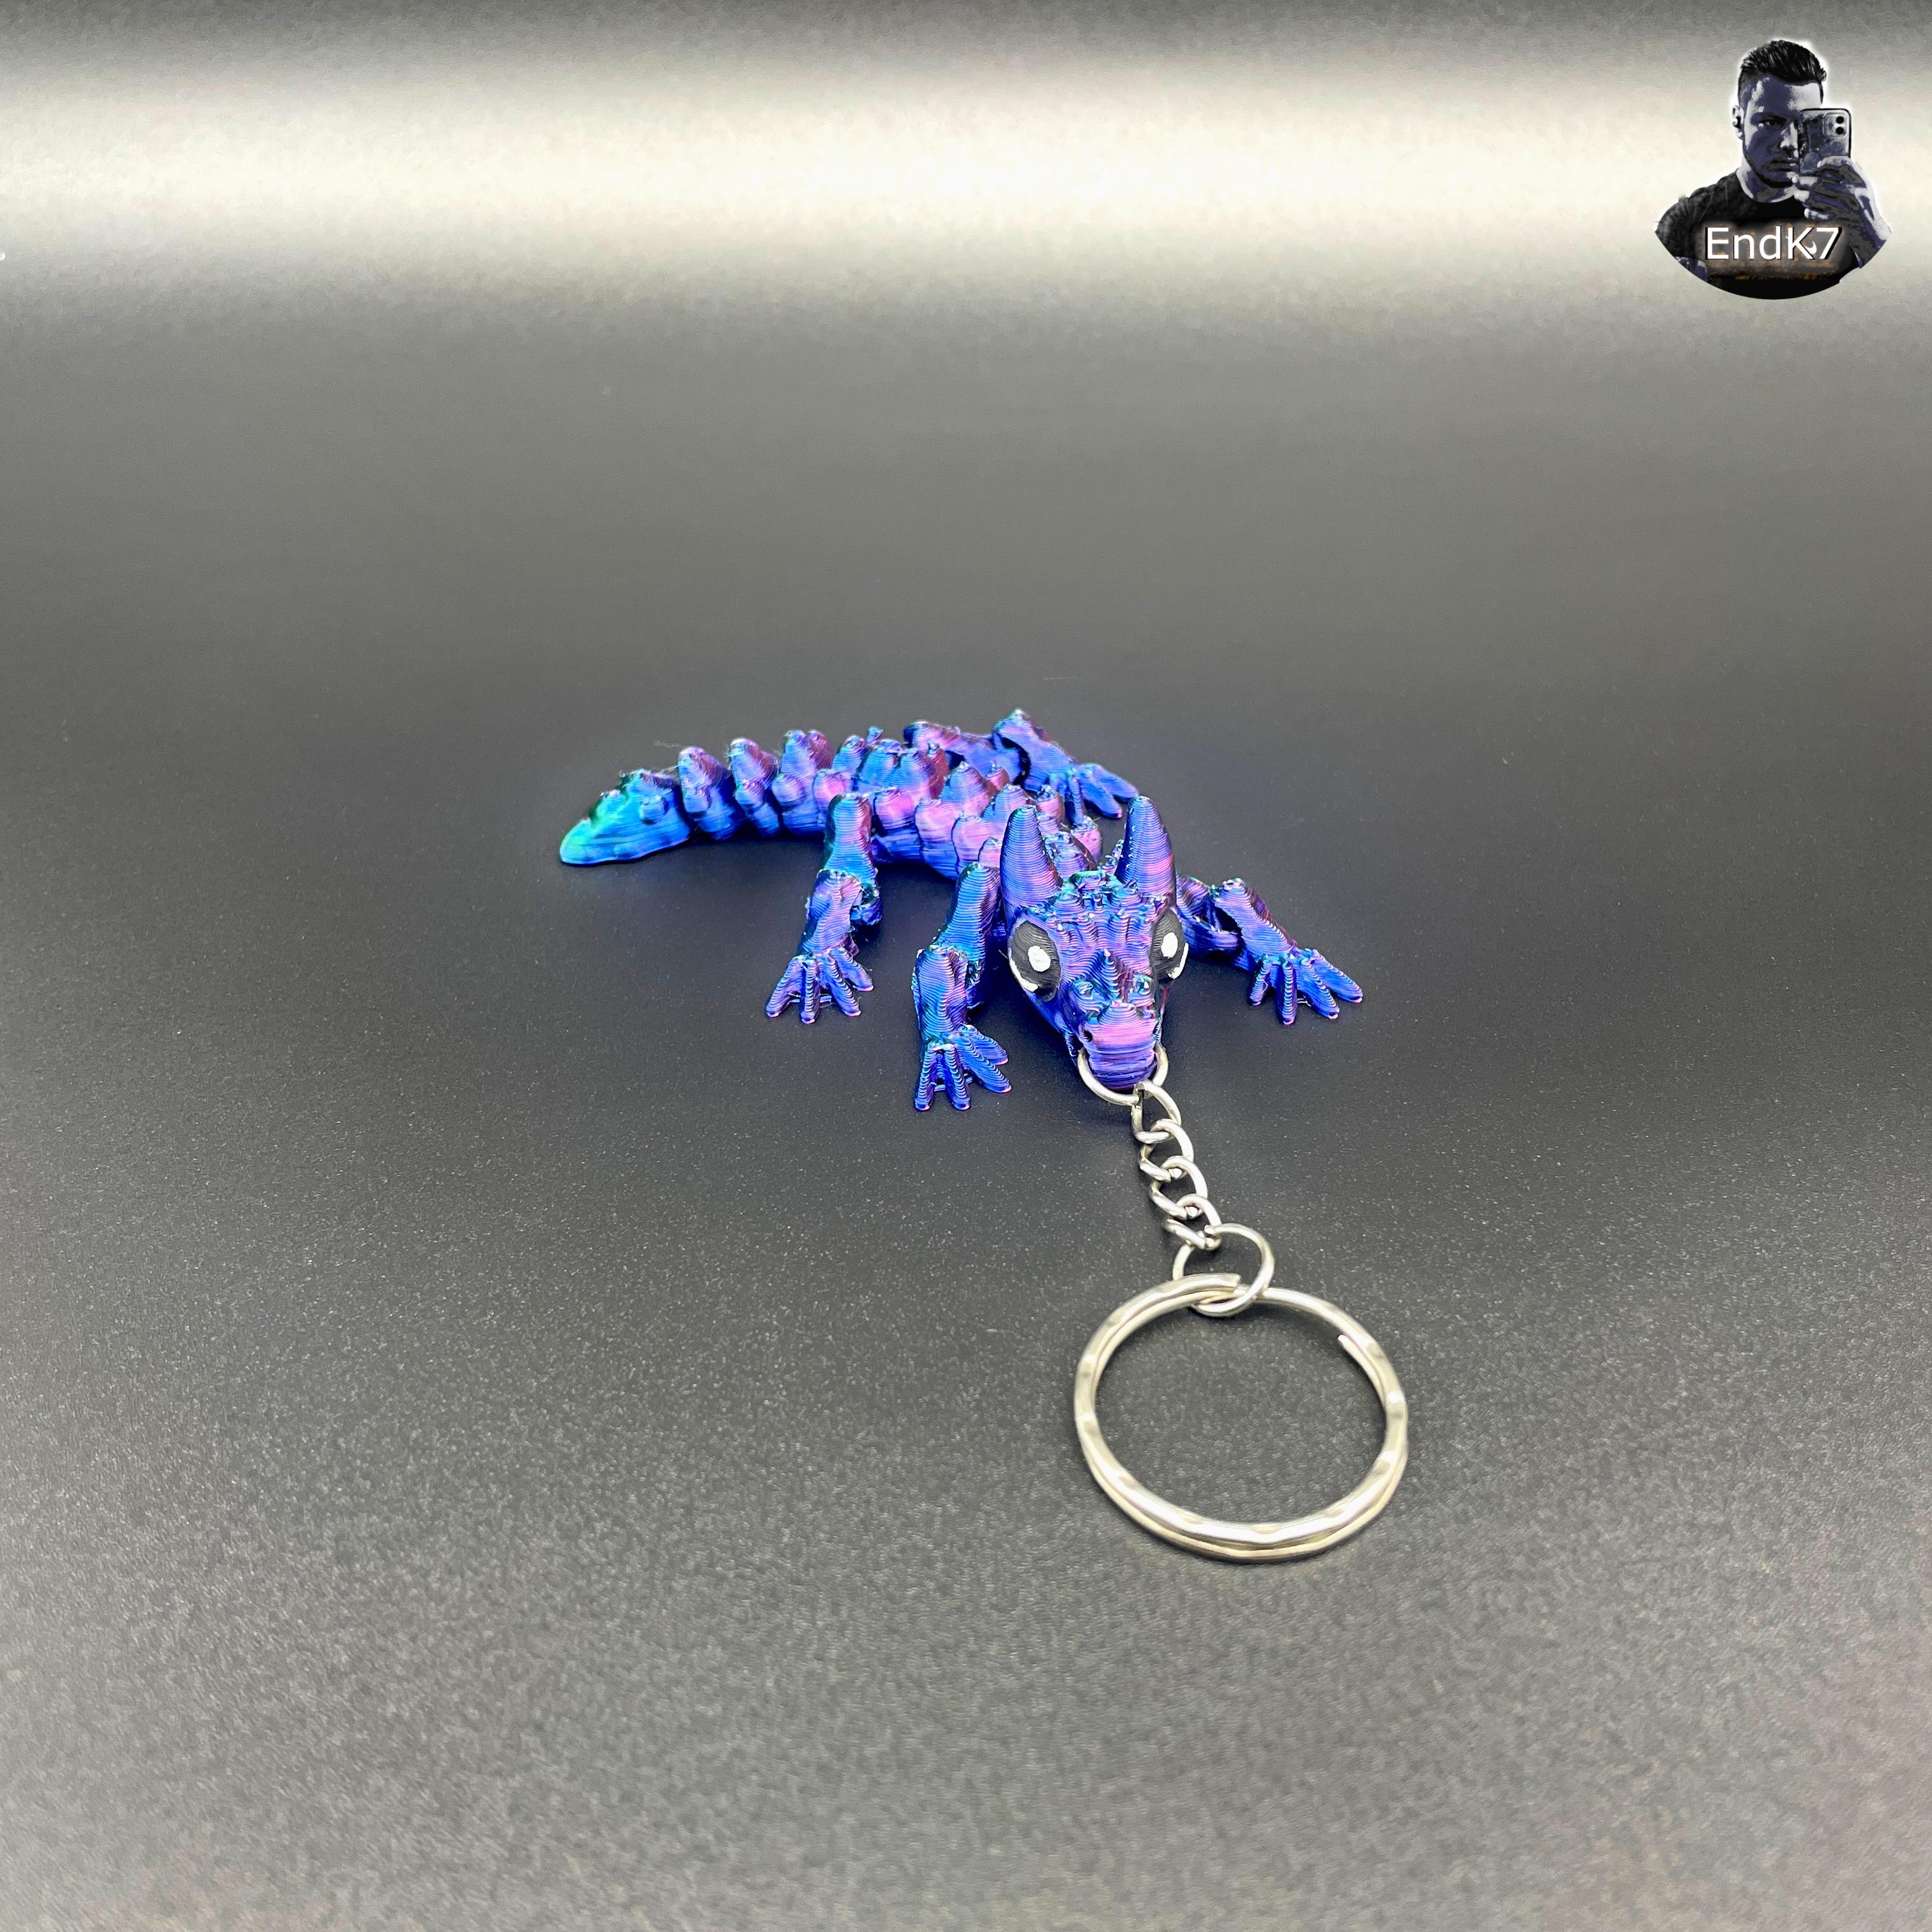 Baby Bull Dragon Keychain - Flexi - Print in Place - No Supports - Fantasy 3d model